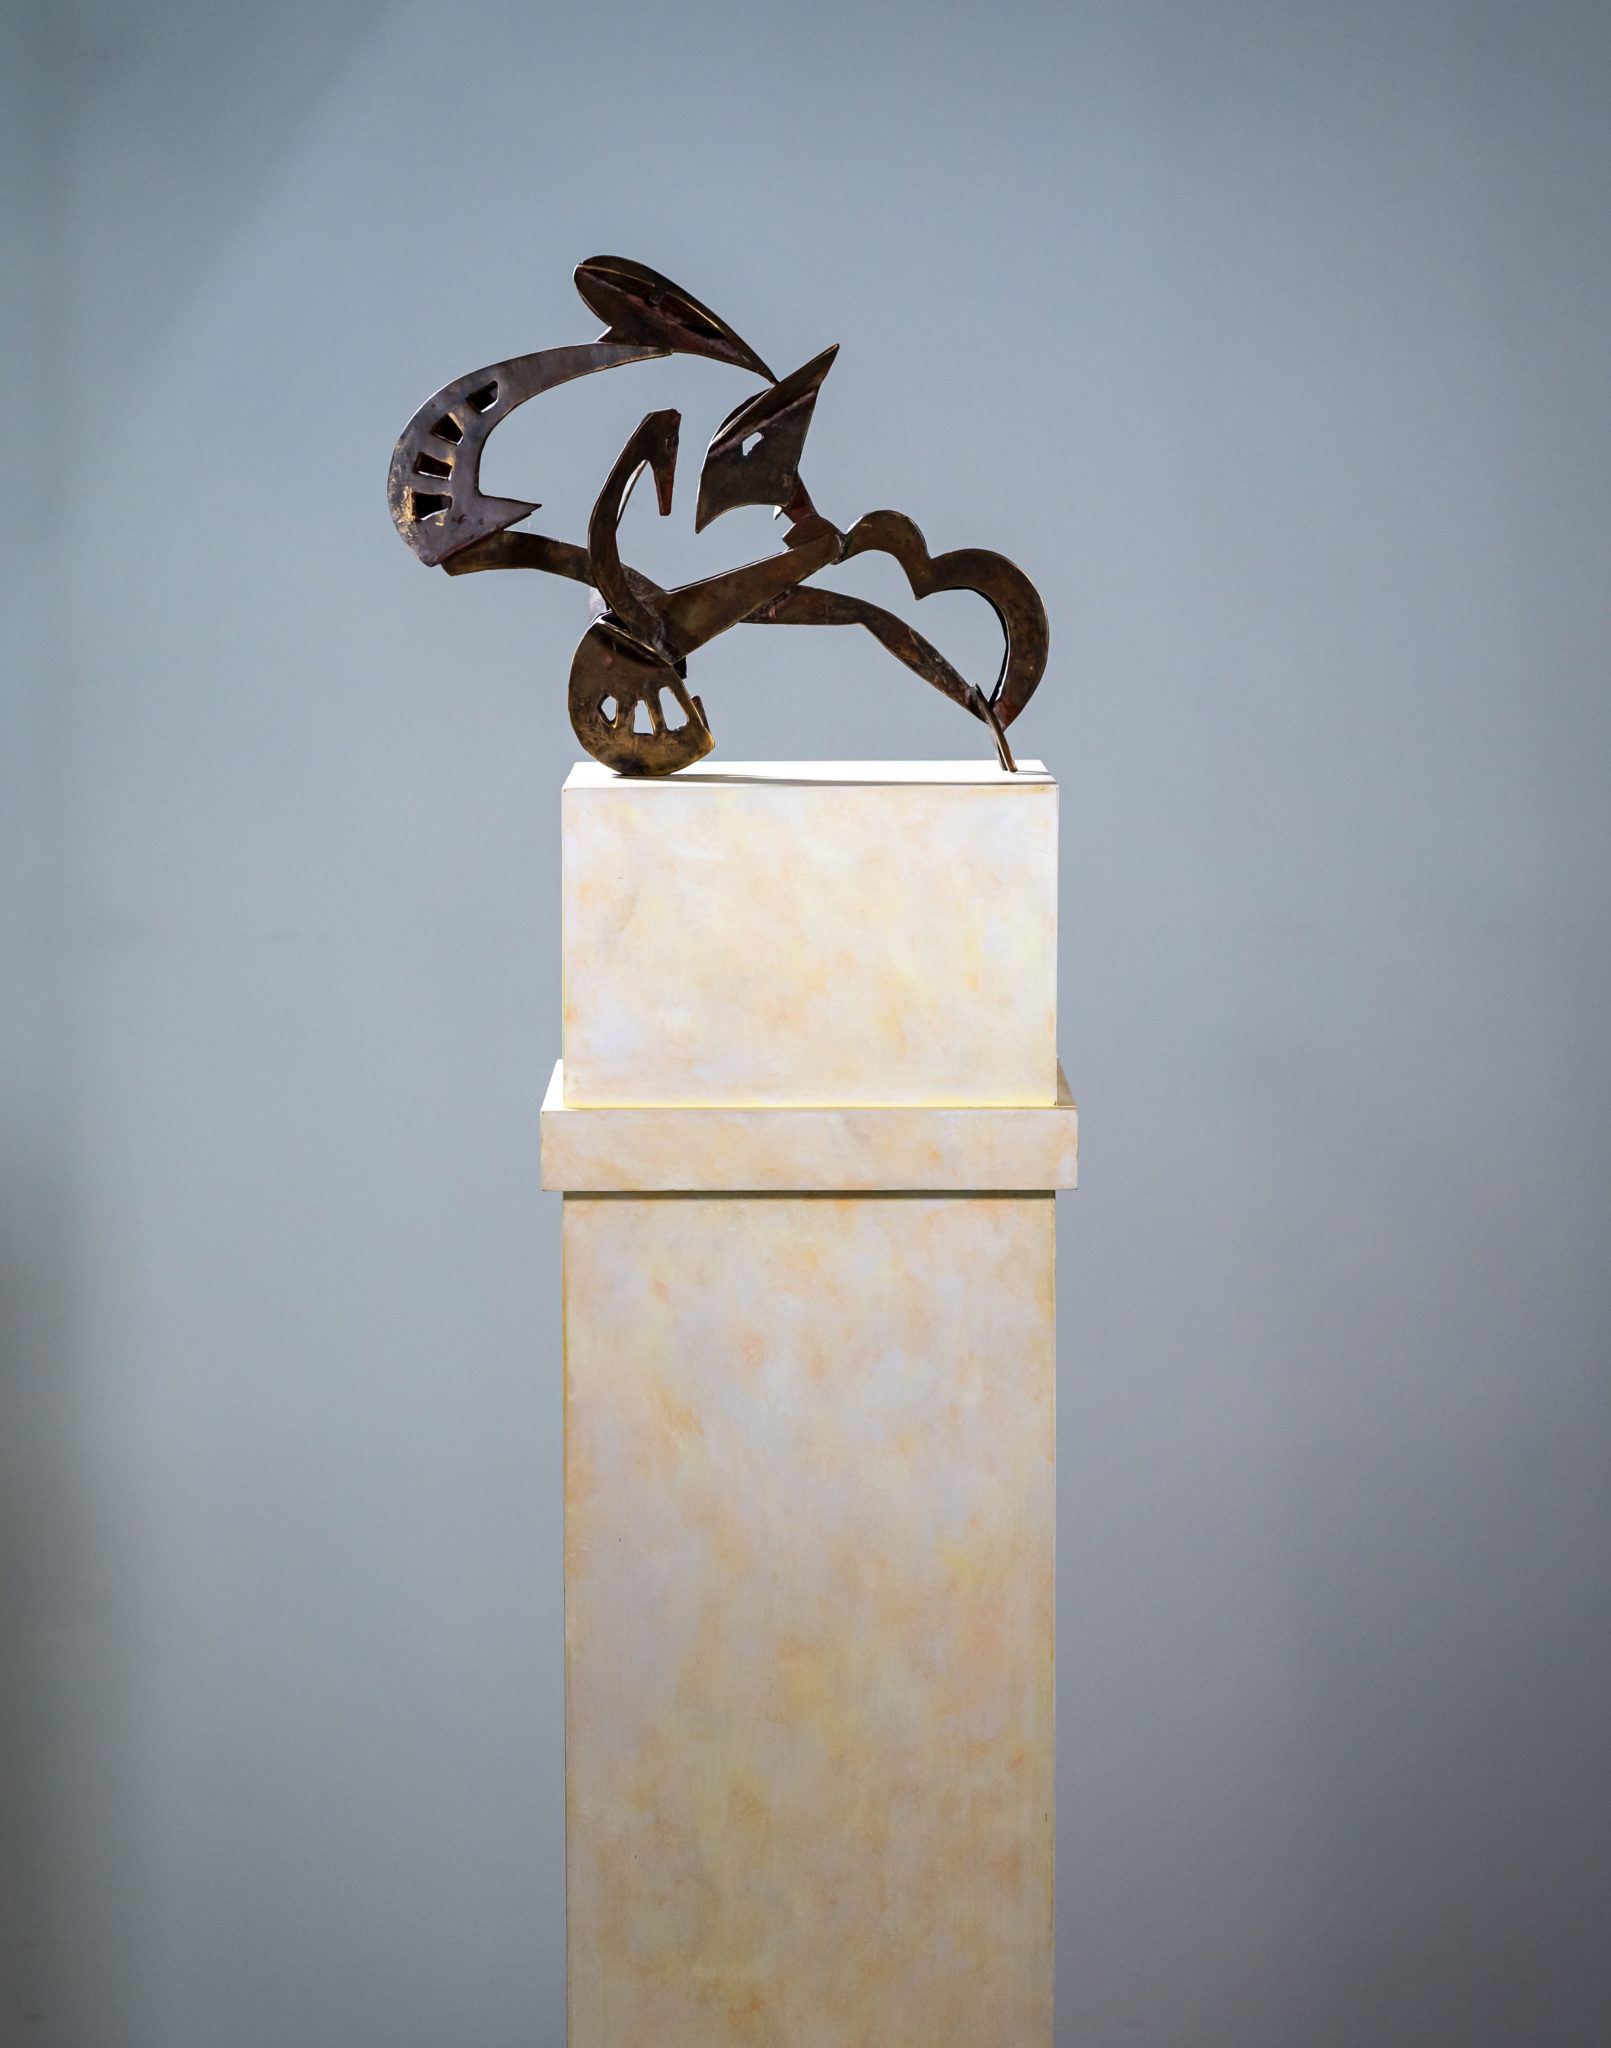 Dan Wollmering, Sure and Plenty II, 1987-88, MDF and bronze, 31 x 36 x 11 cm, Latrobe Regional Gallery Collection, purchased with assistance of the Victorian Regional Galleries Art Foundation, 1989.